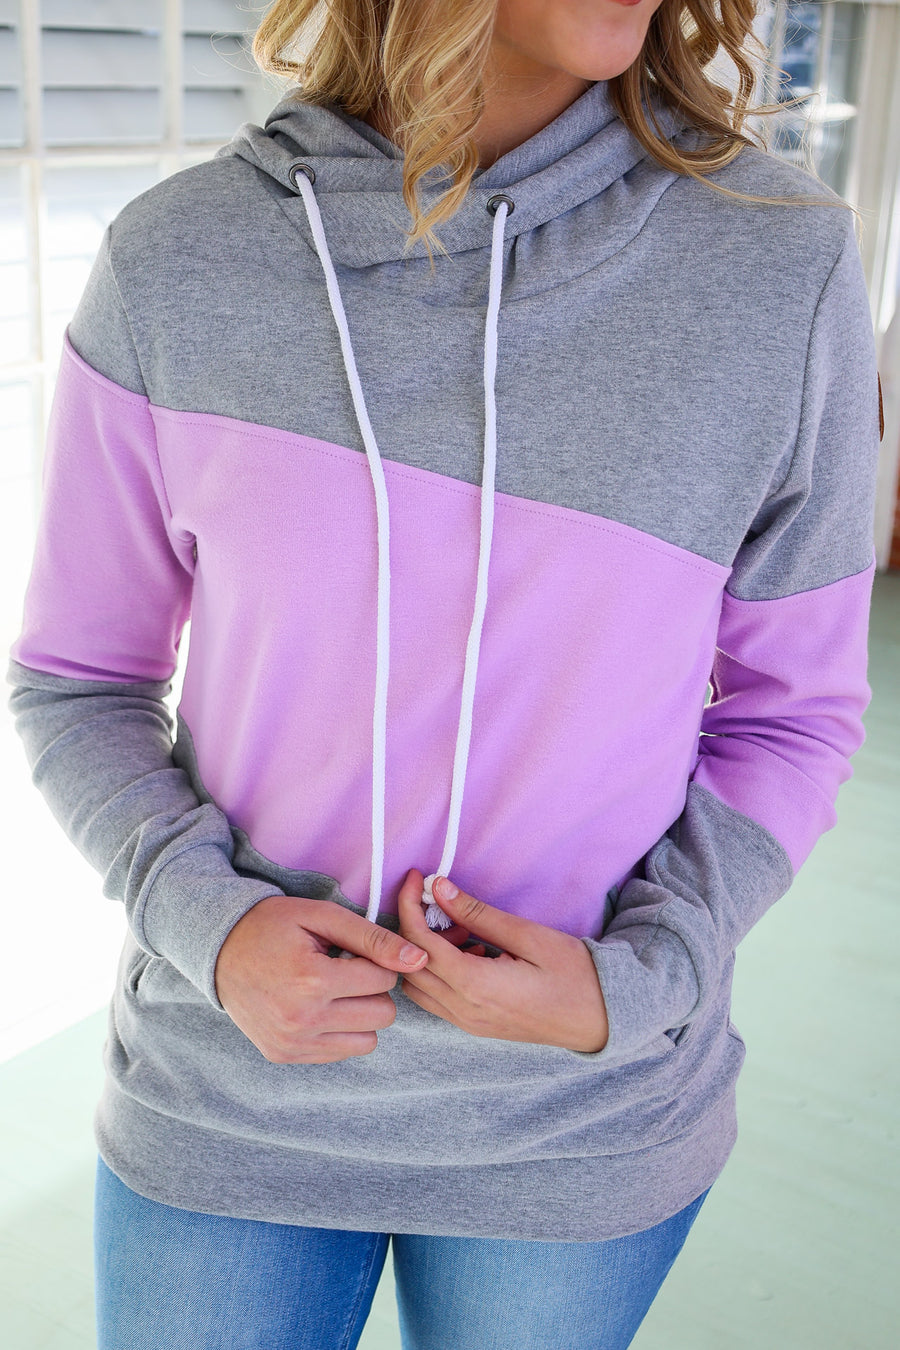 Lavender Fields Pull Over Long Sleeve Hoodie Sweater Sm - 3XL * on sale